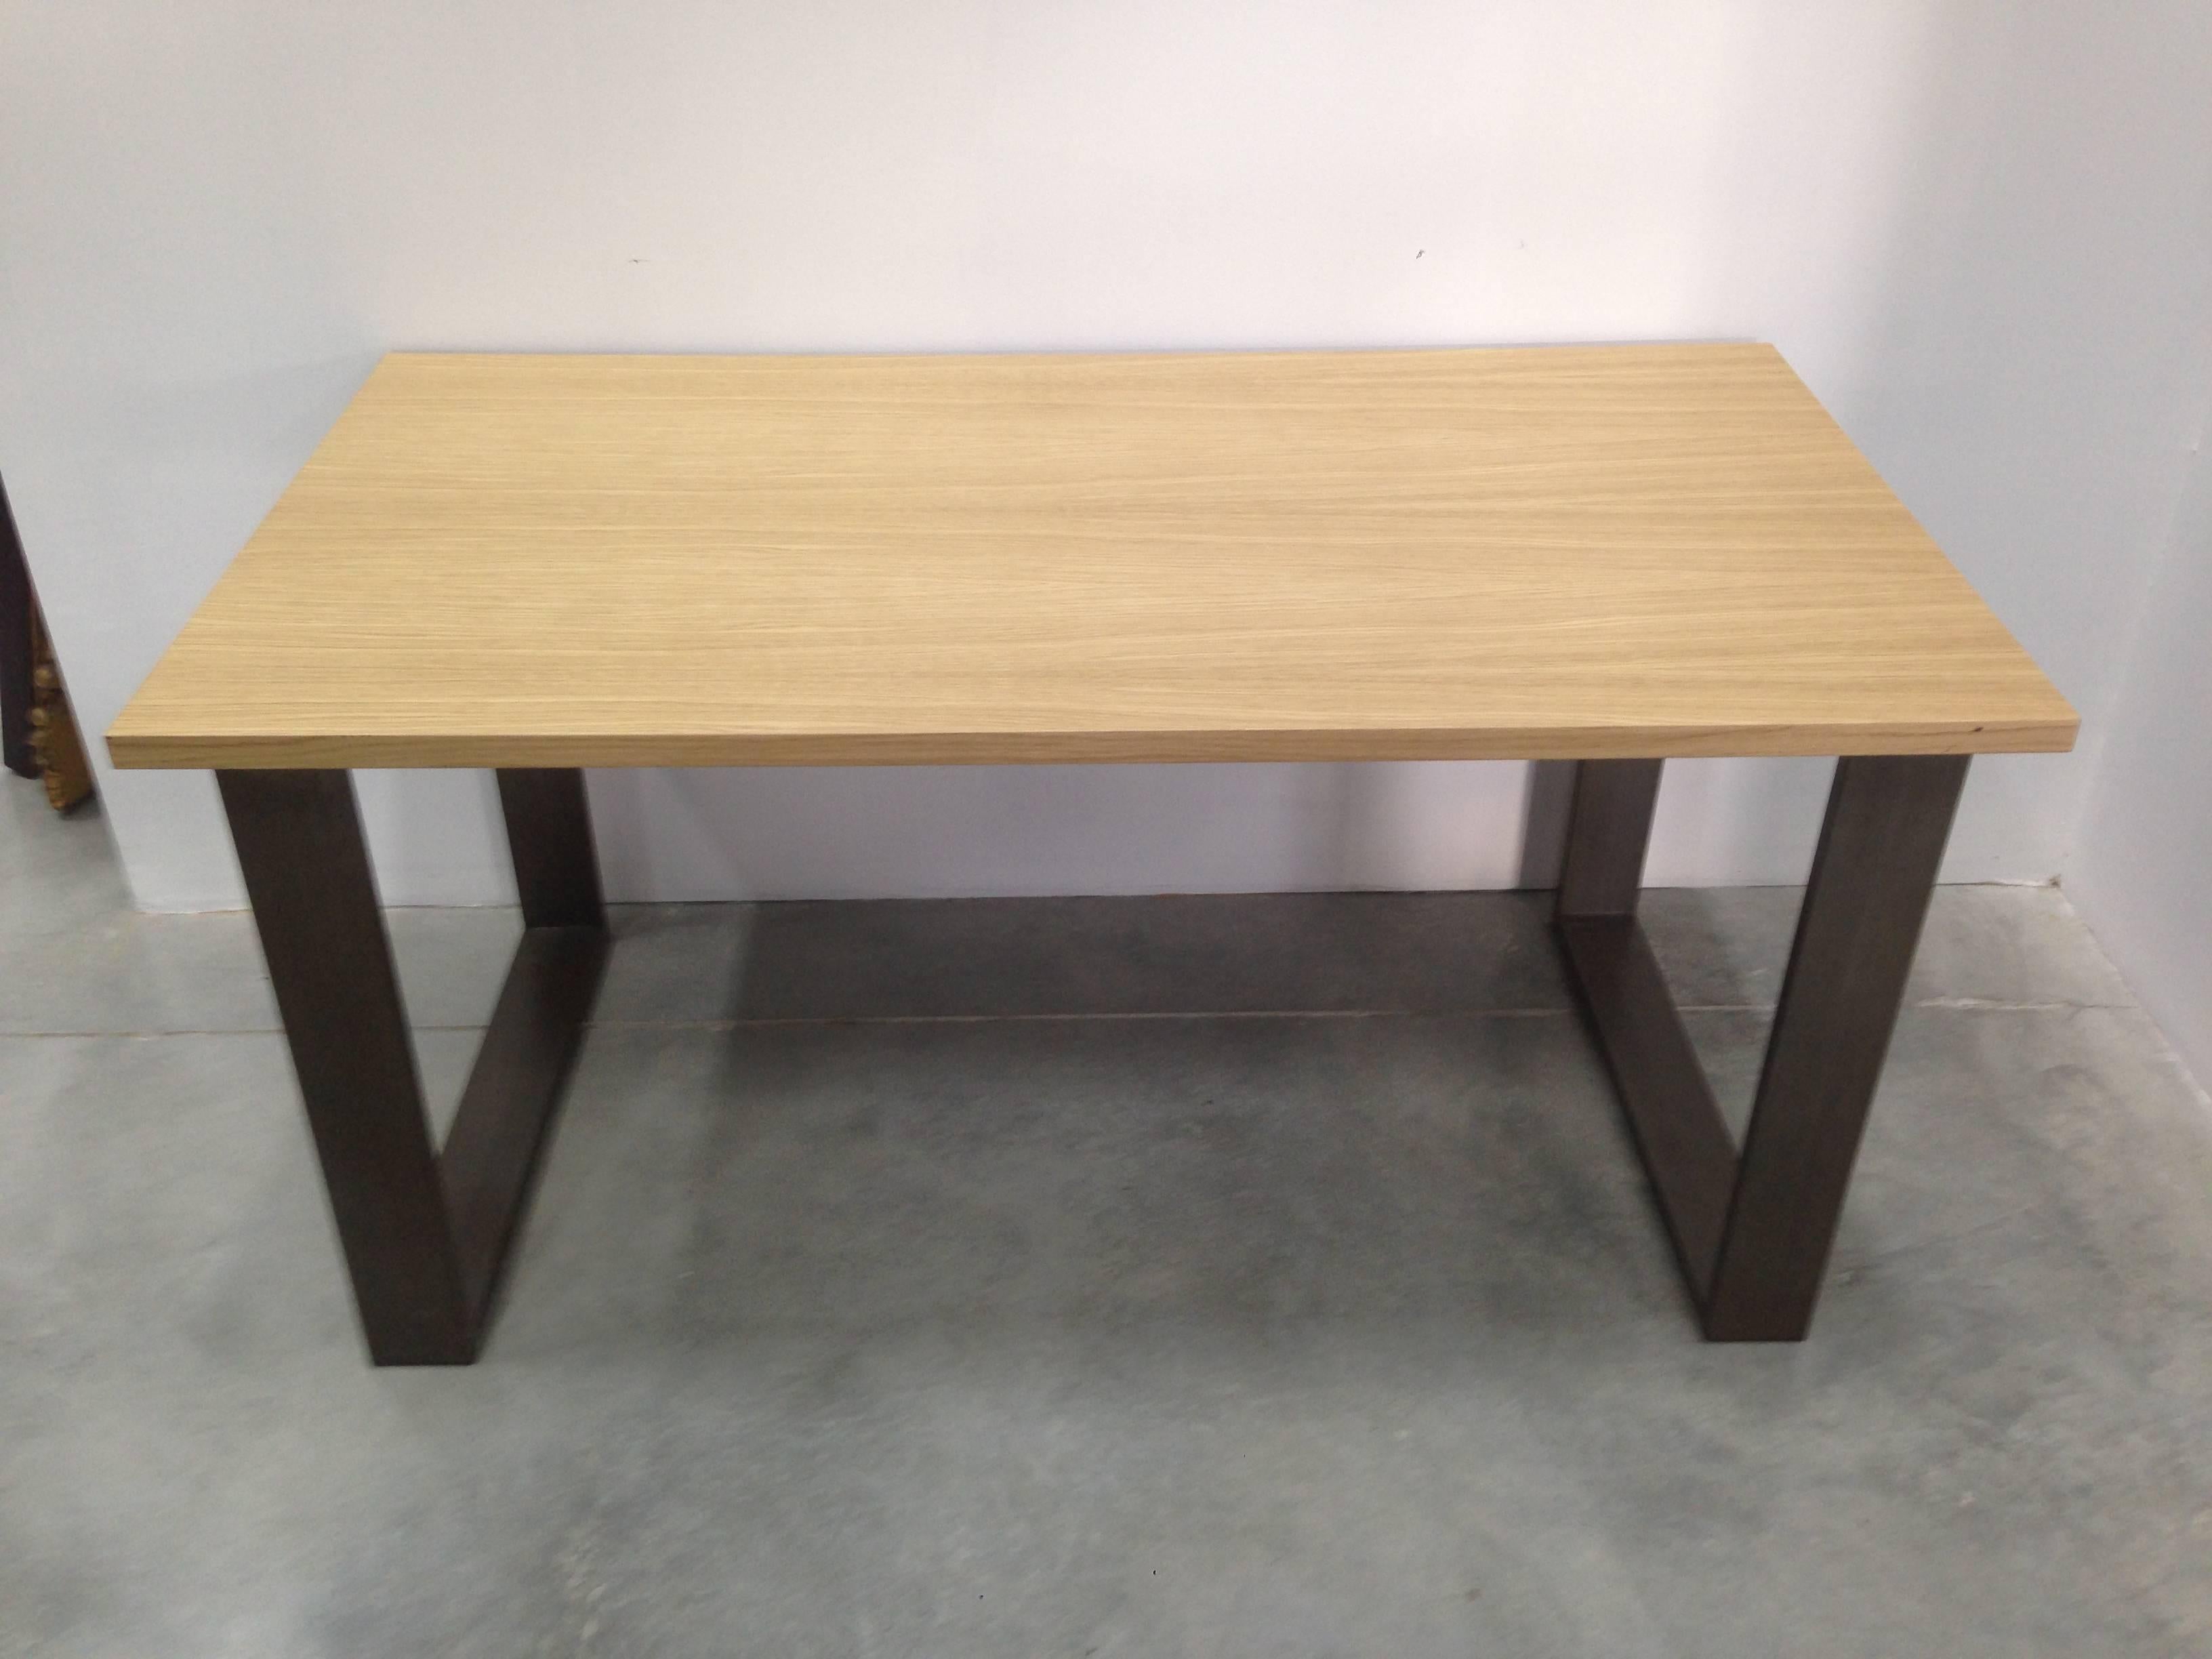 Spanish Modern Iron Industrial Table with Wood Top